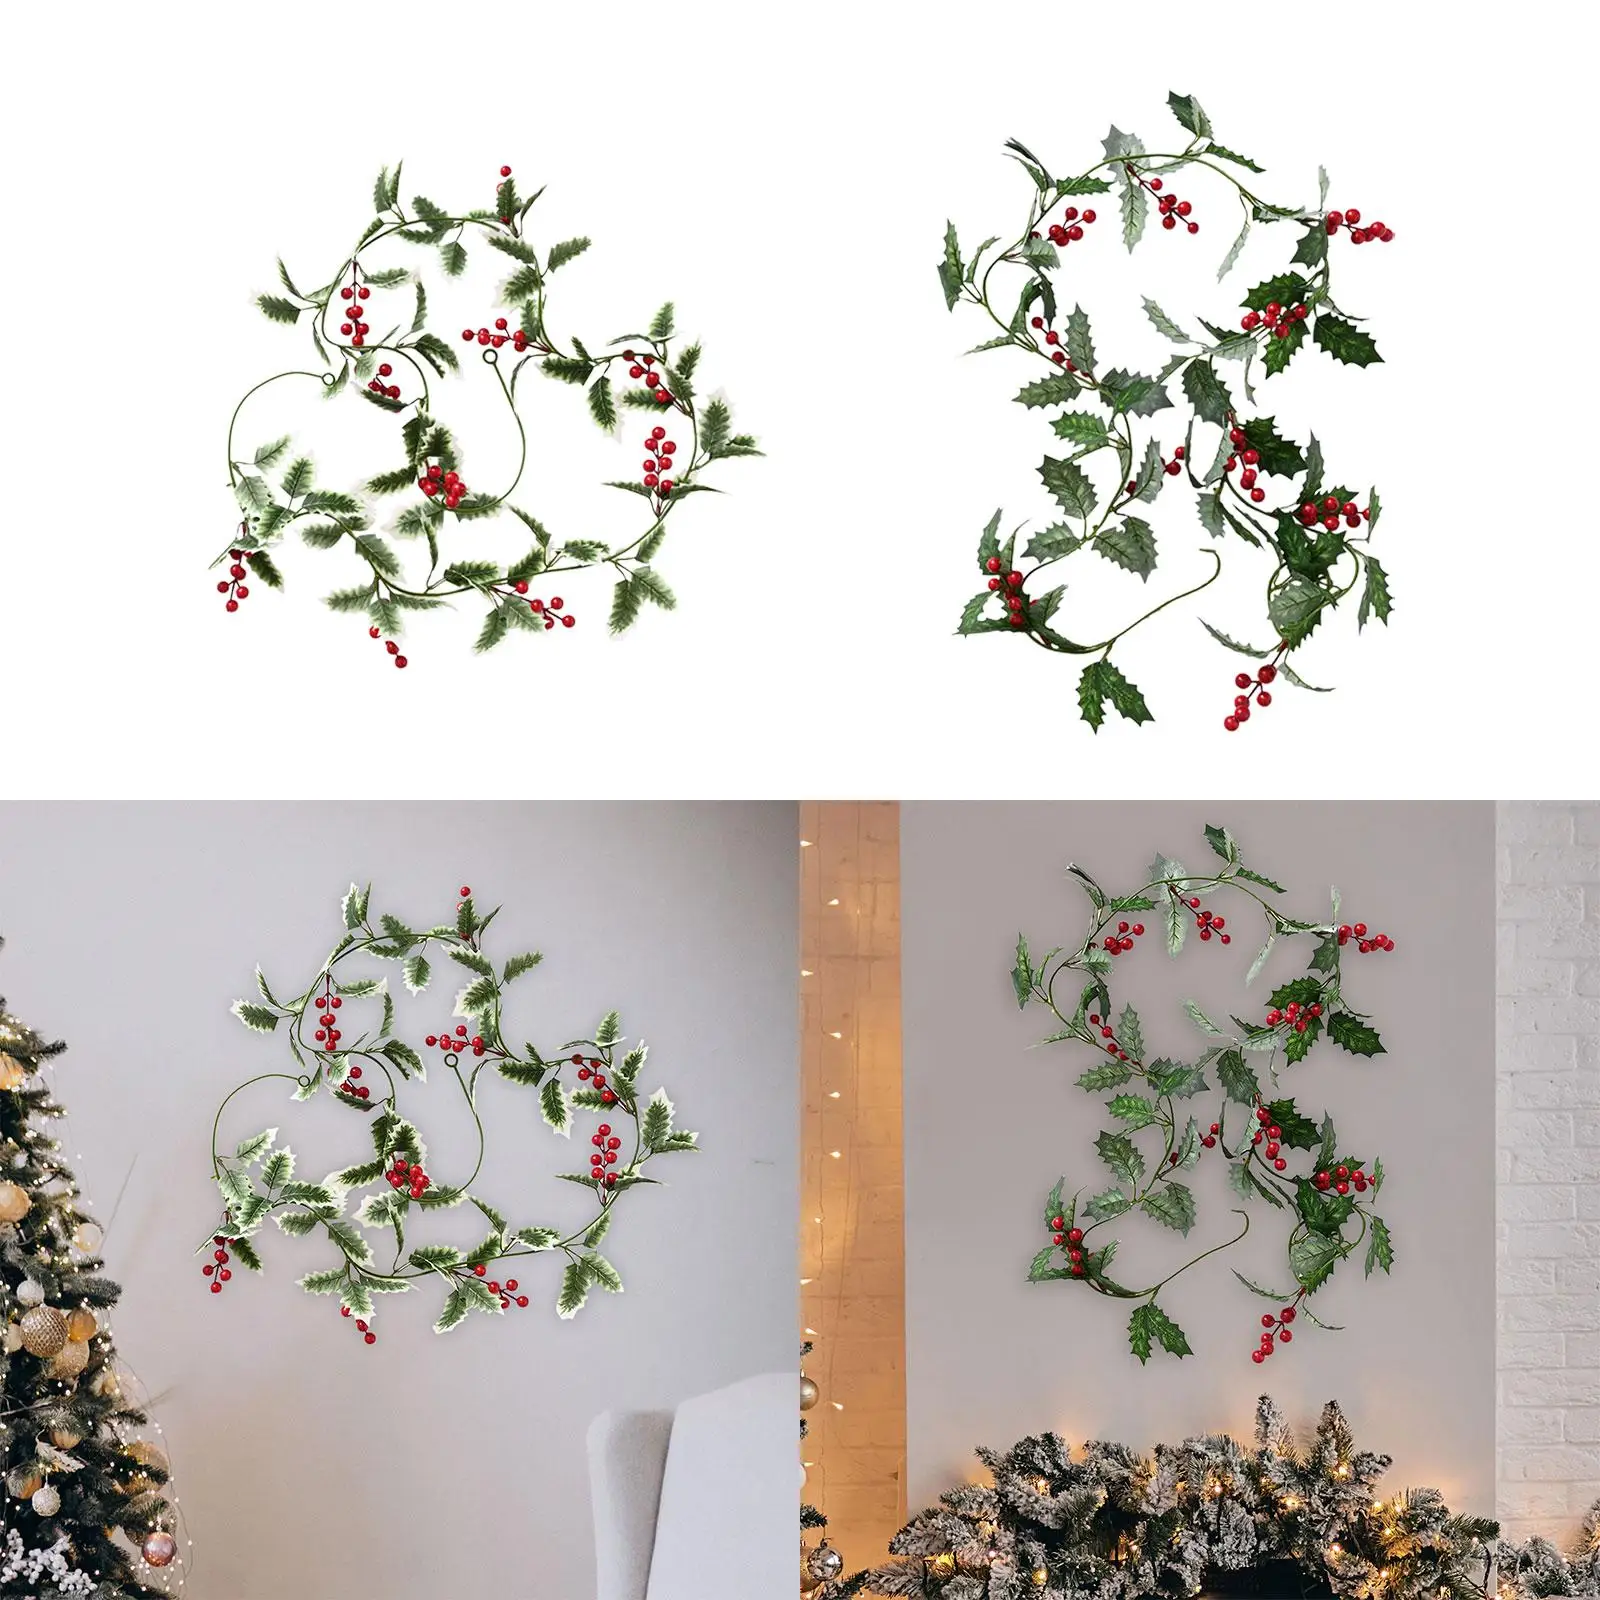 Artificial Christmas Vine Garland 2M Decor Green Leaf Wreaths Christmas Garland for Party Home Indoor Outdoor Holiday Decoration